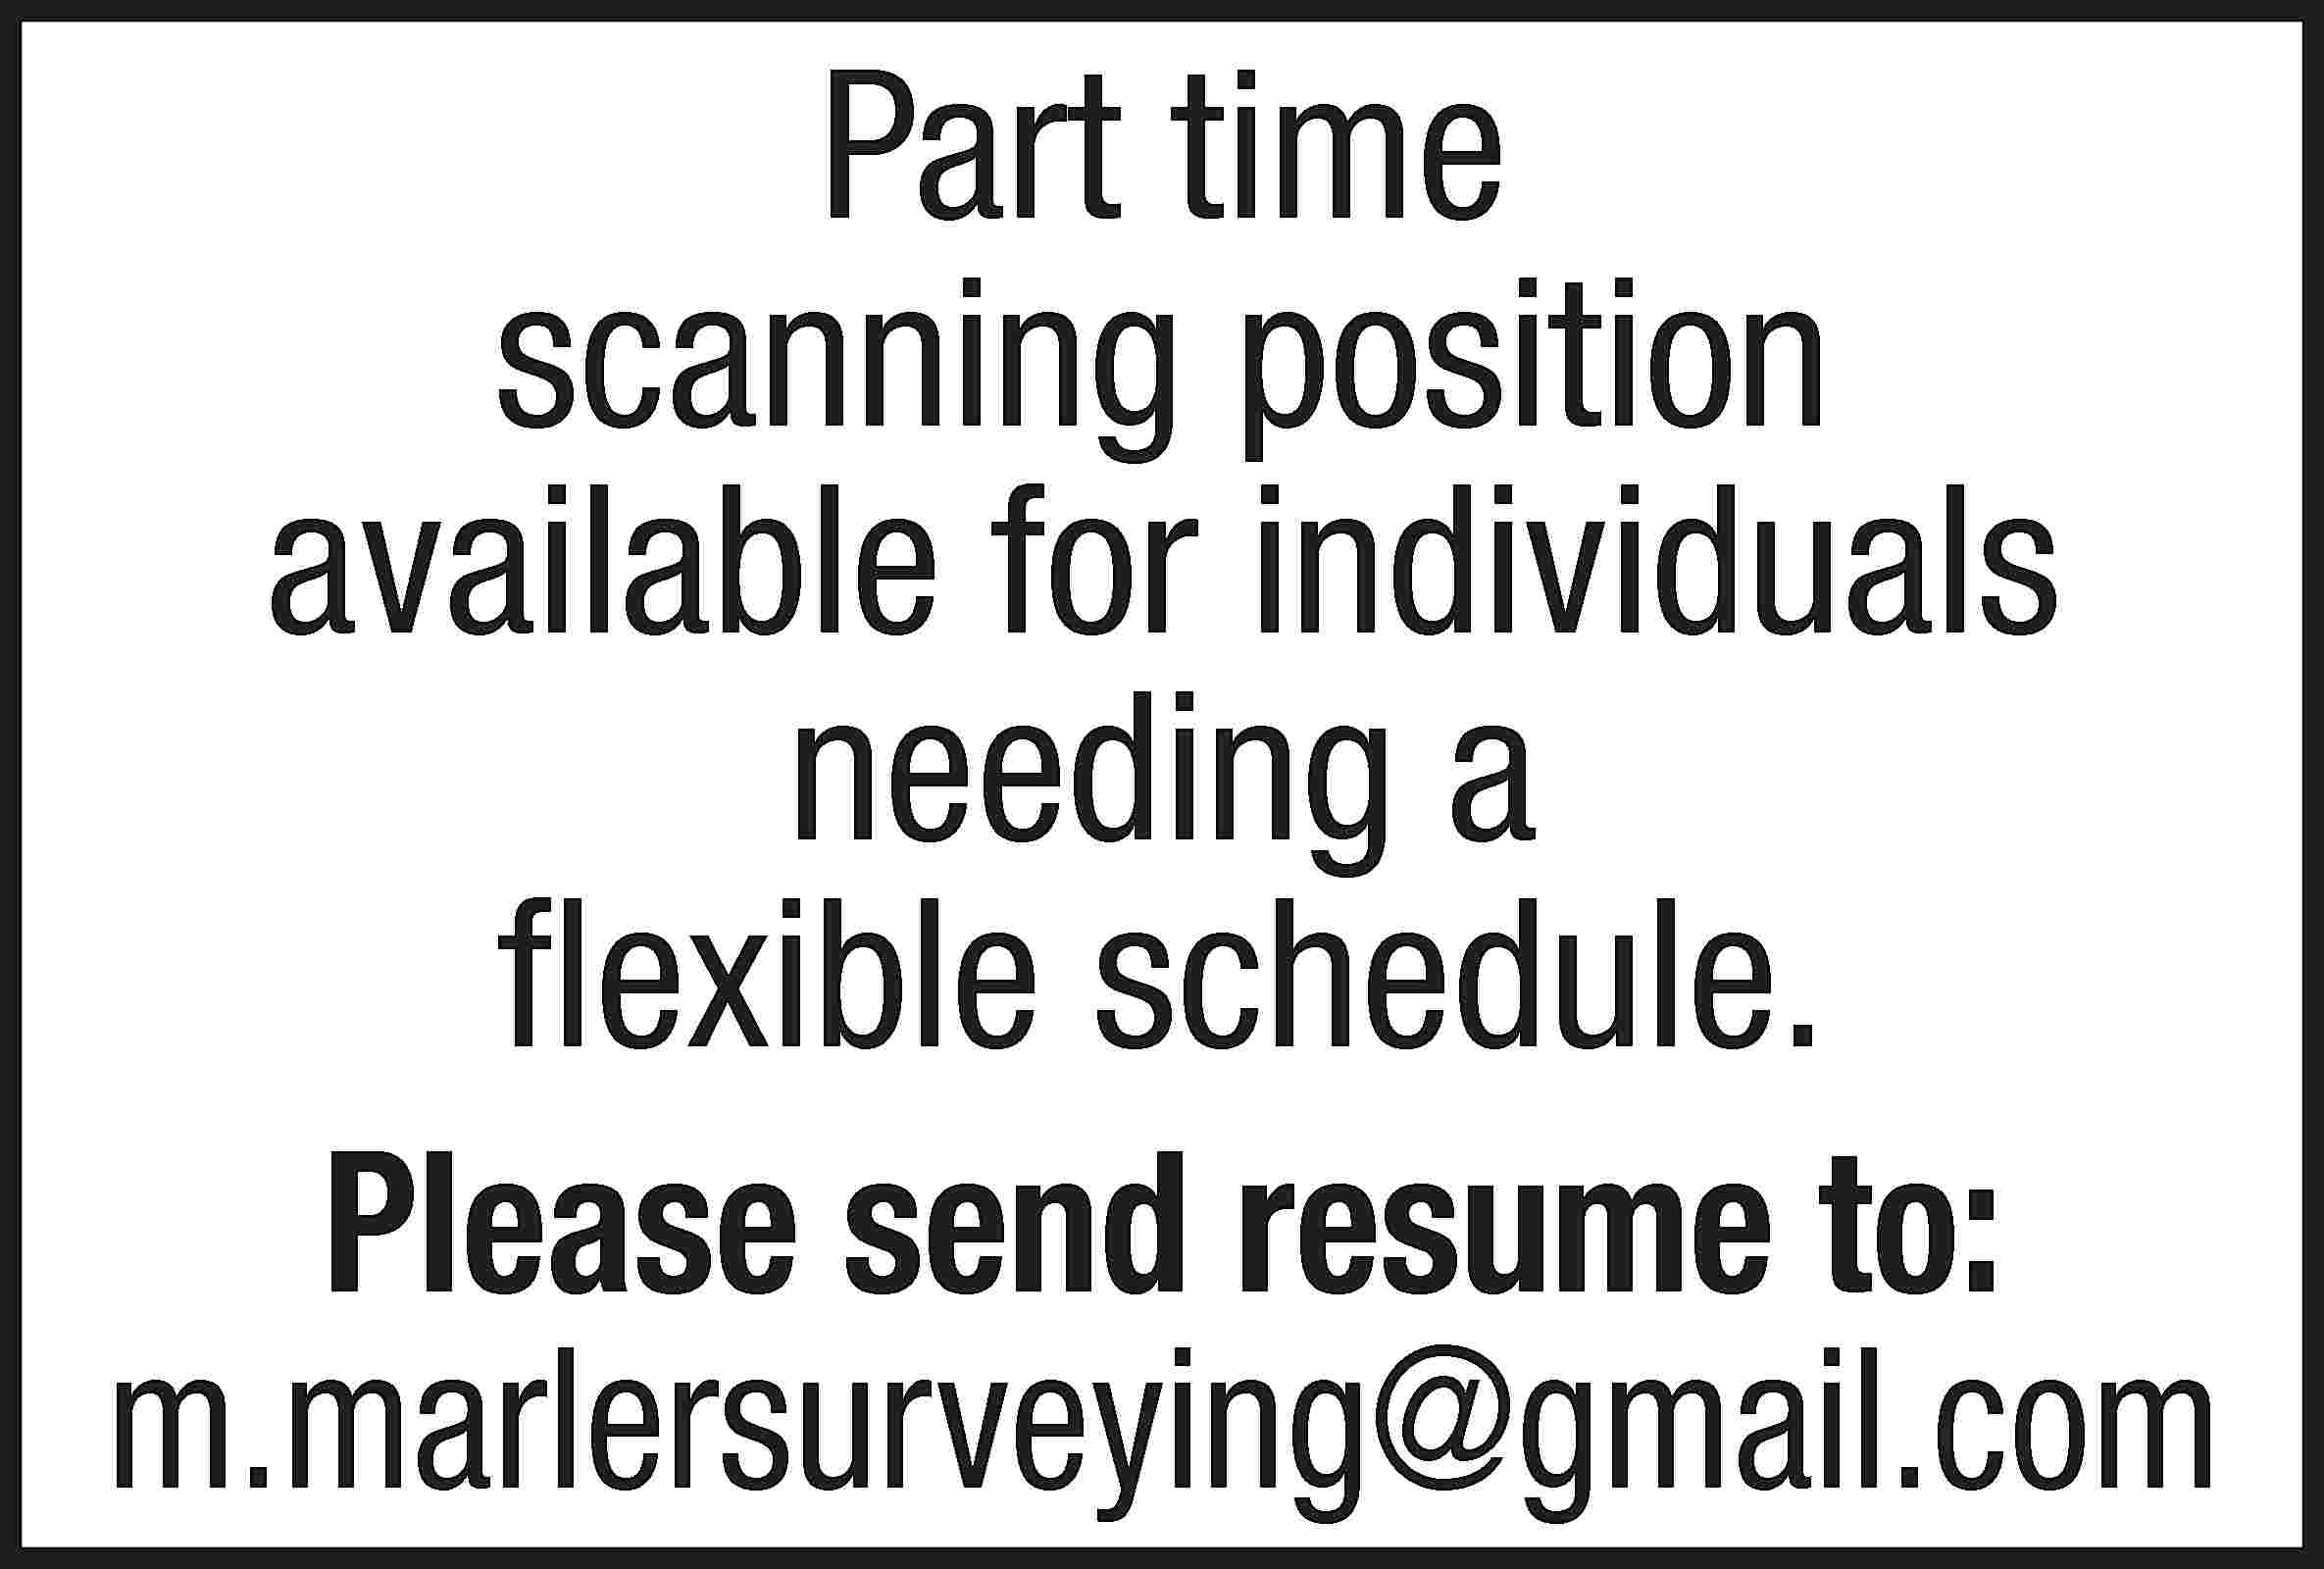 Part time scanning position available  Part time scanning position available for individuals needing a flexible schedule. Please send resume to: m.marlersurveying@gmail.com